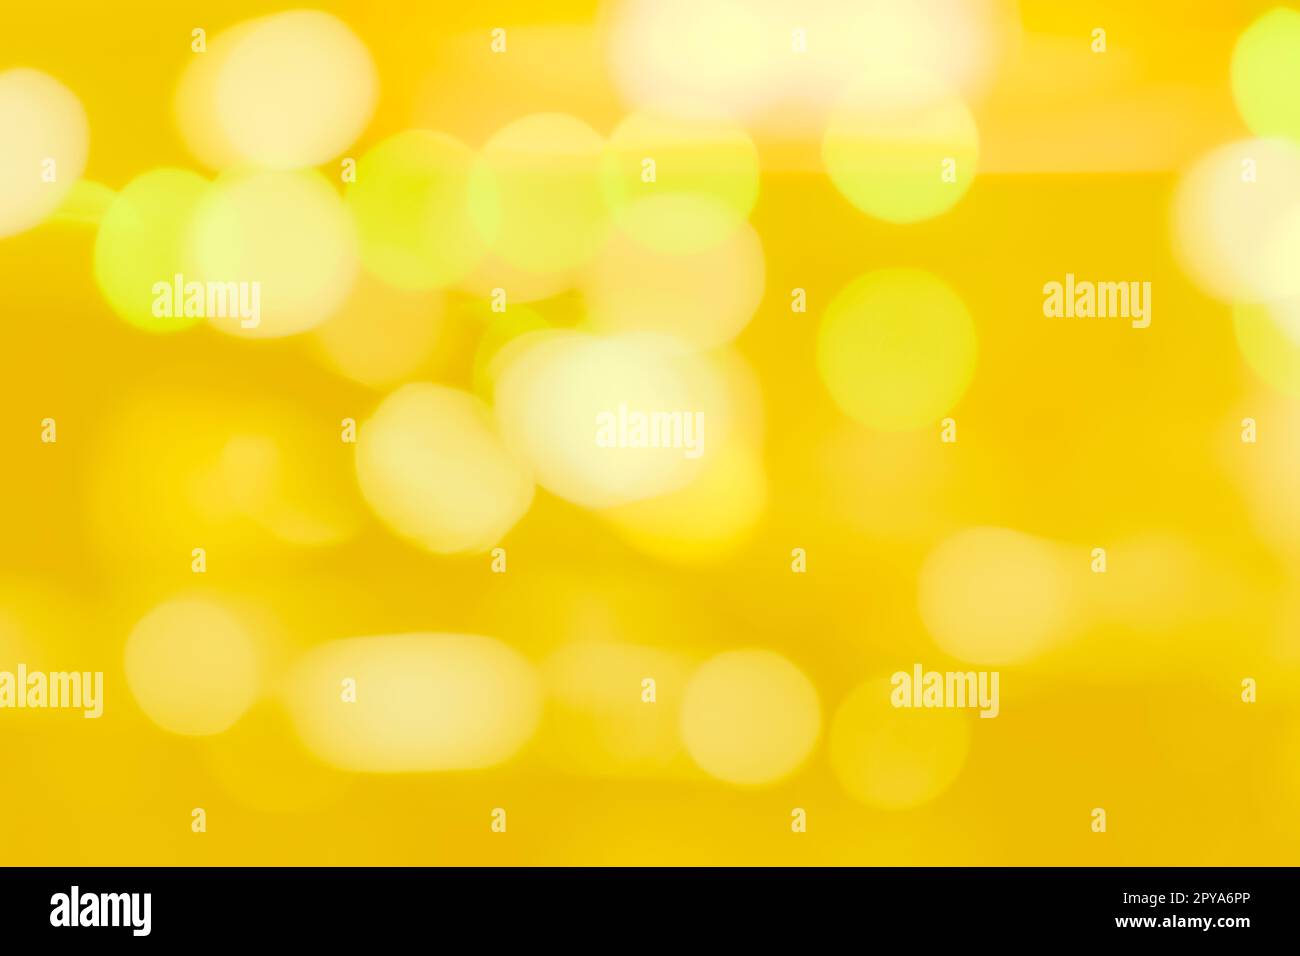 Blurred yellow and golden bokeh background. Blur abstract background of yellow light. Yellow light with beautiful pattern of circle bokeh. Golden bokeh abstract background for festive decoration. Stock Photo